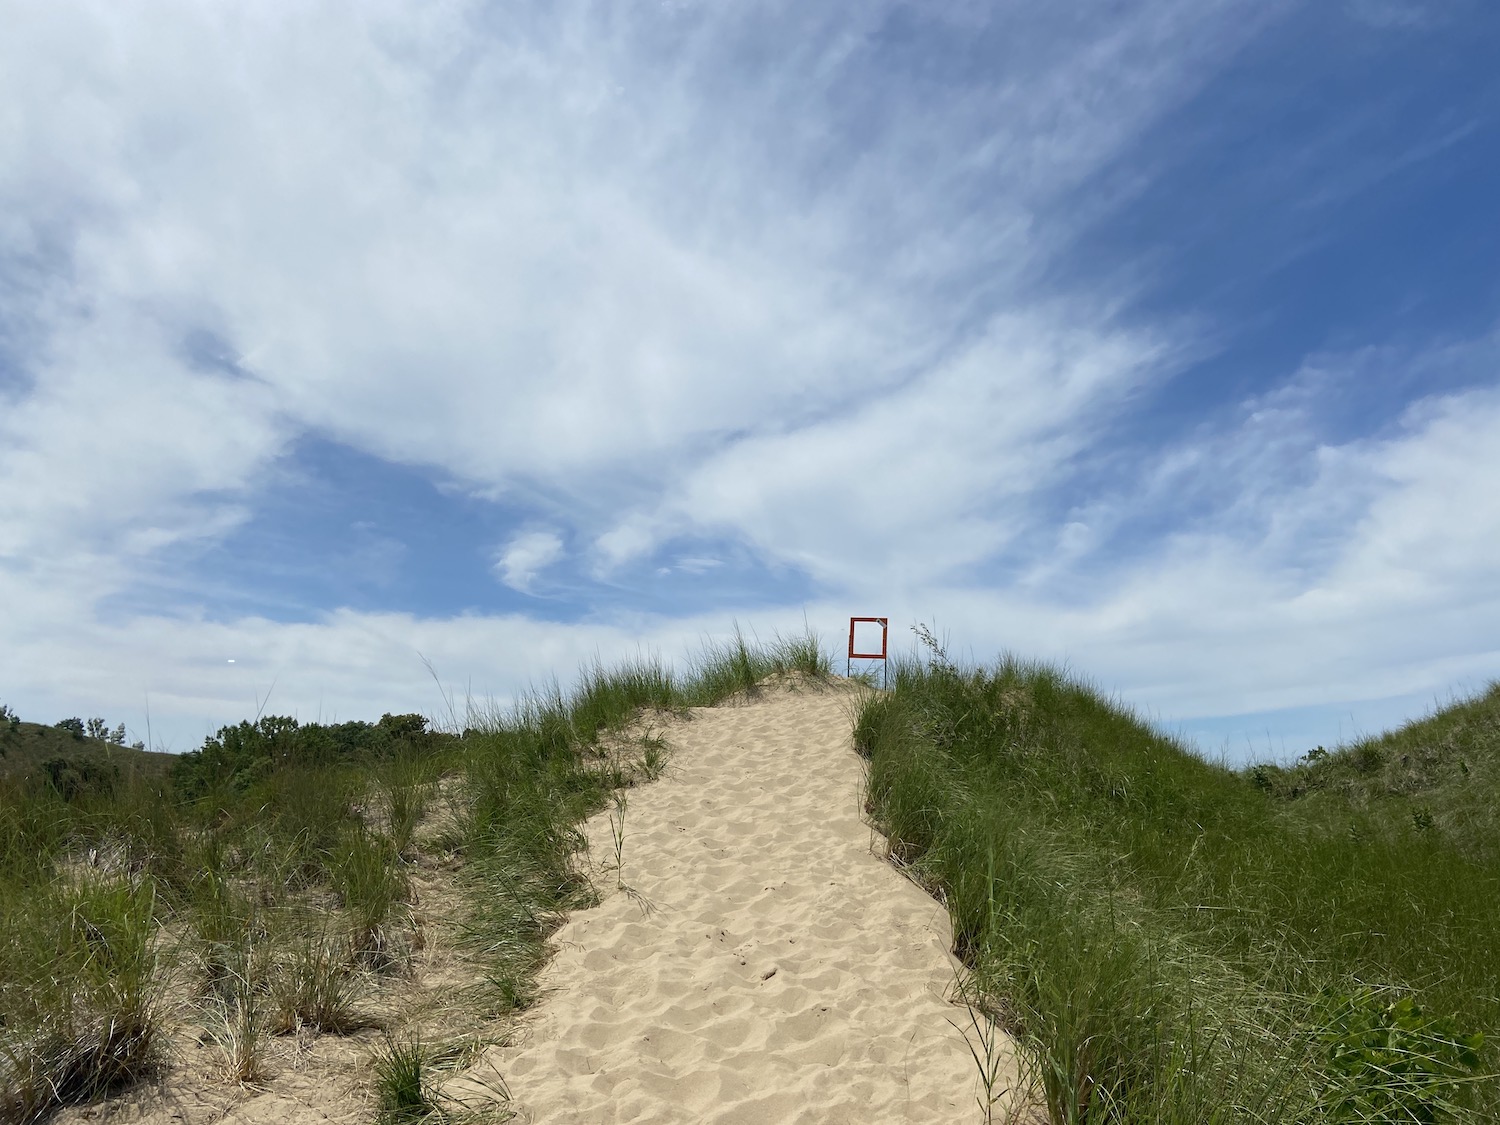 A sand dune in Michigan with an empty frame meant to hold a trail info sign on top of the dune.